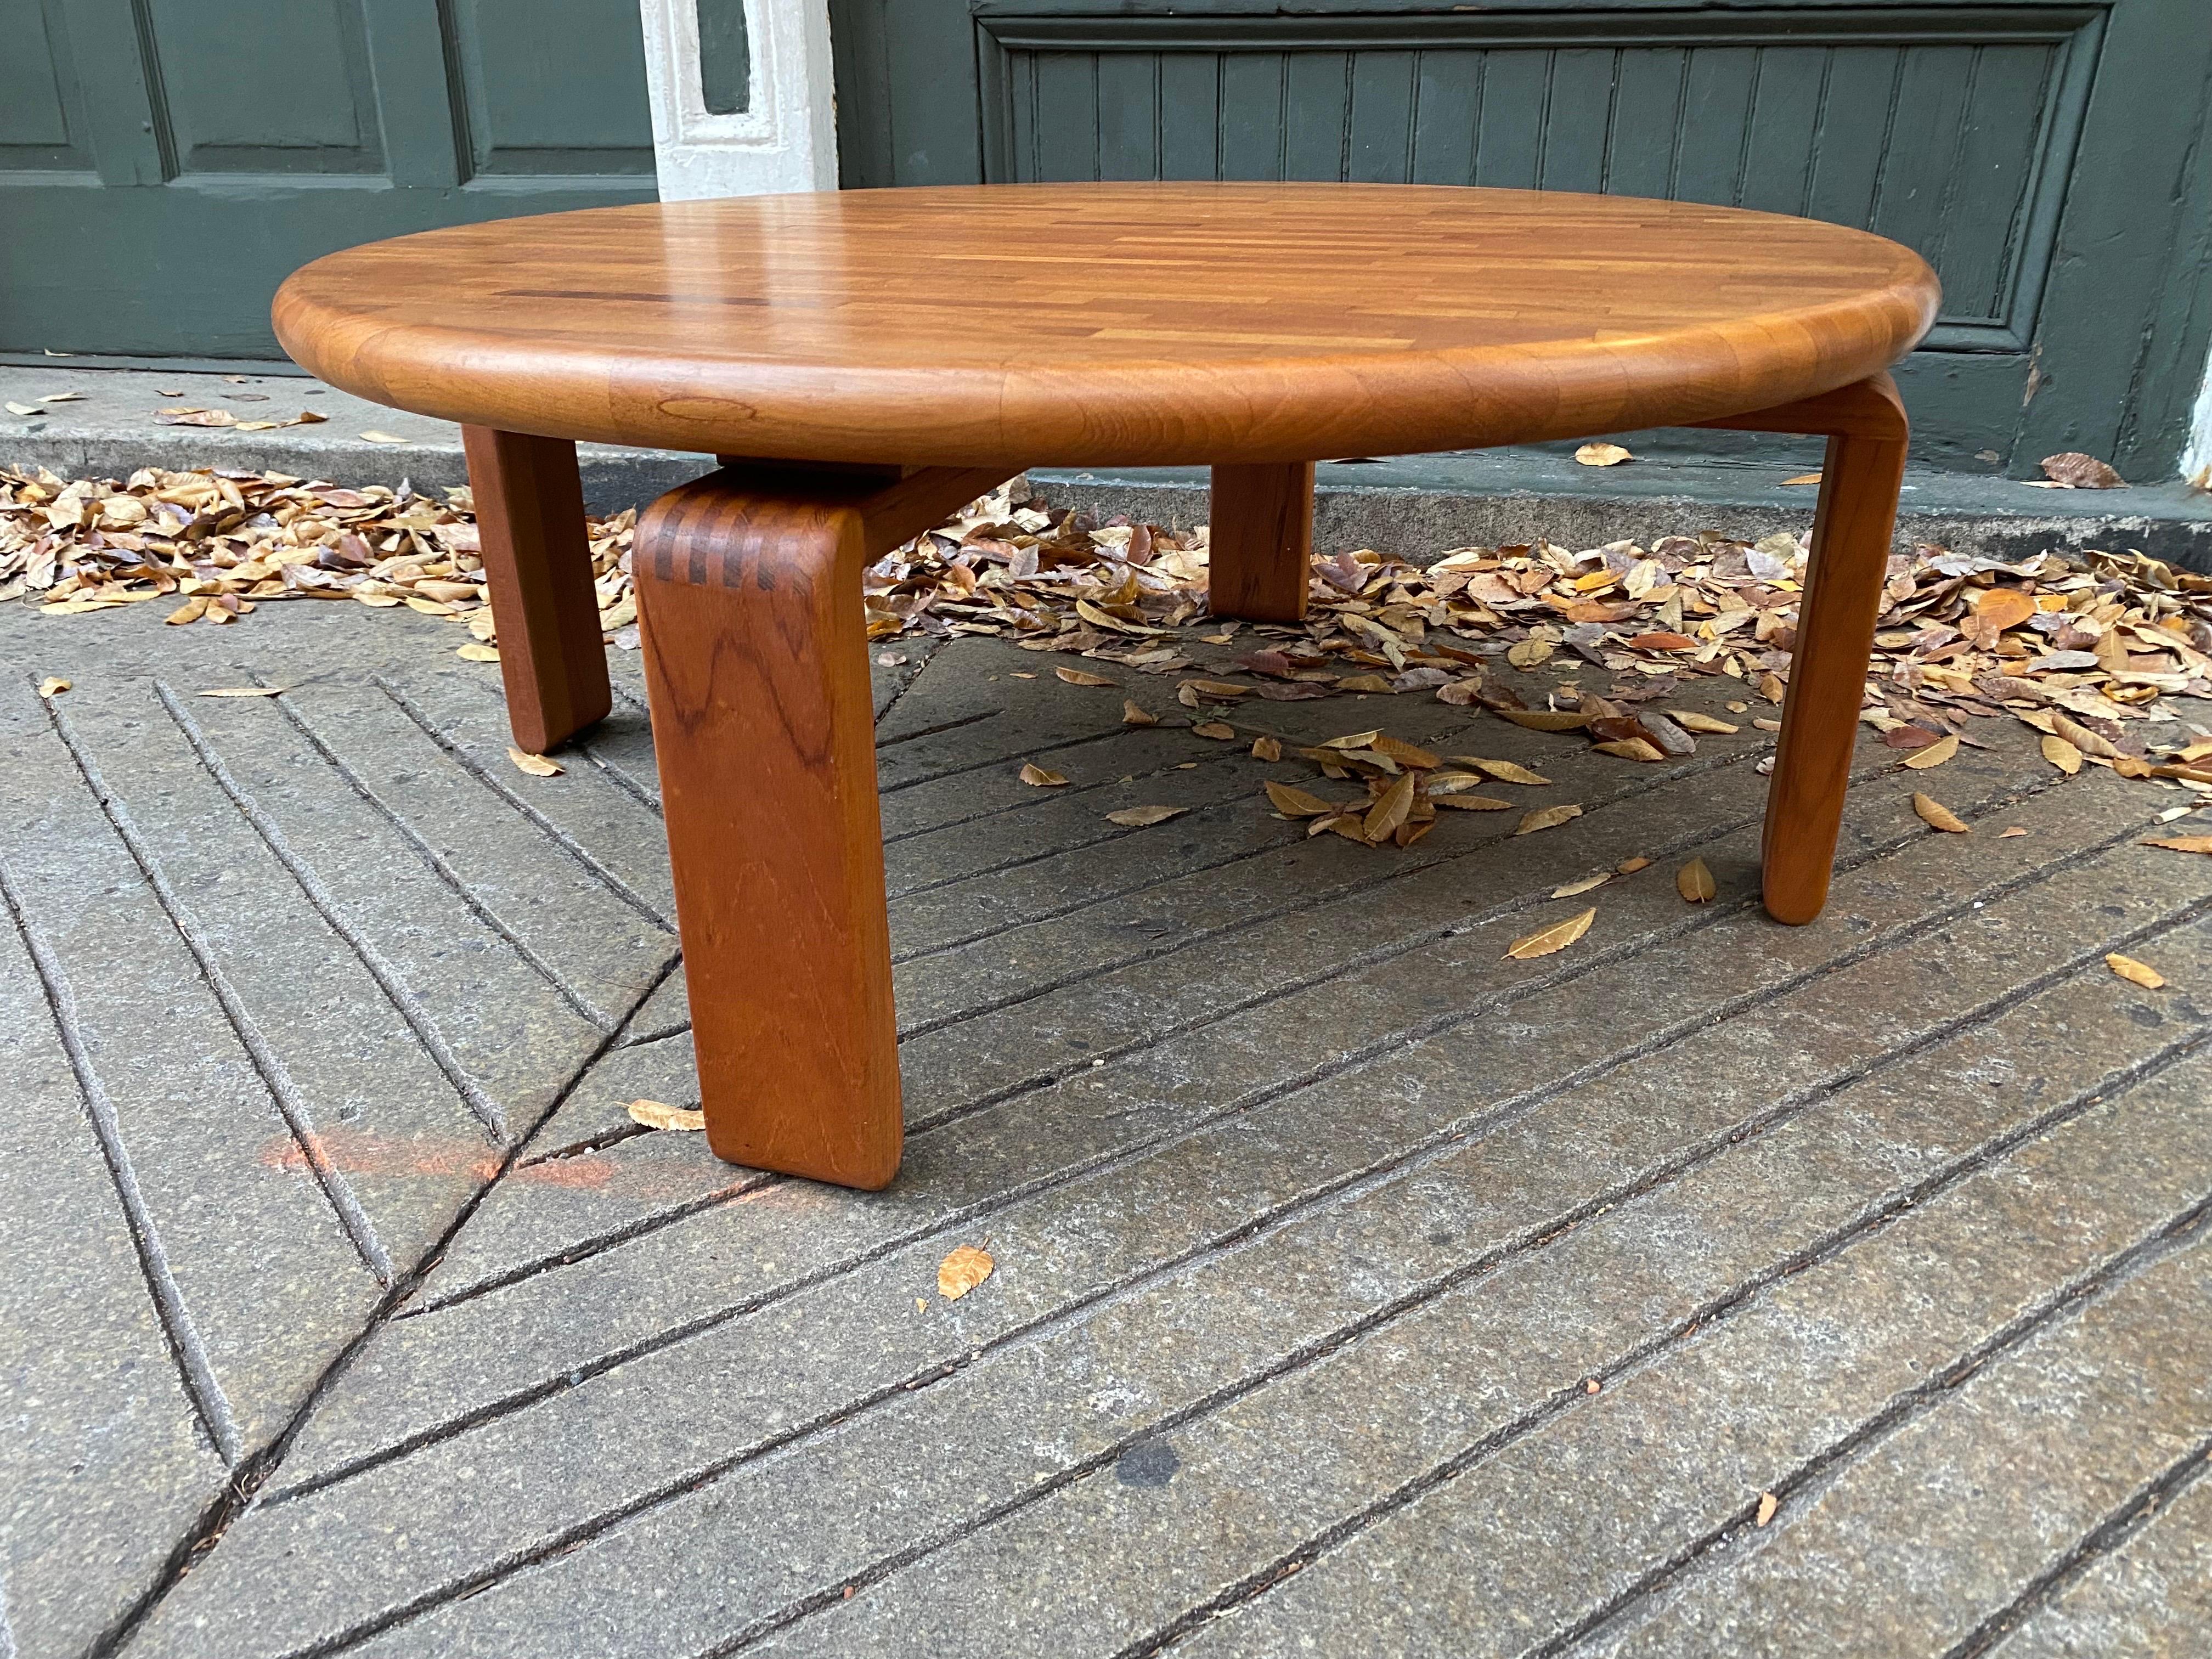 SOLID Teak Coffee Table!  Butcher Block Design made up of Solid Teak Pieces.  Dove-tailed legs also in Solid Wood.  Outstanding quality!  Original condition and ready to go!  This table is solid as a rock!  Good weight!